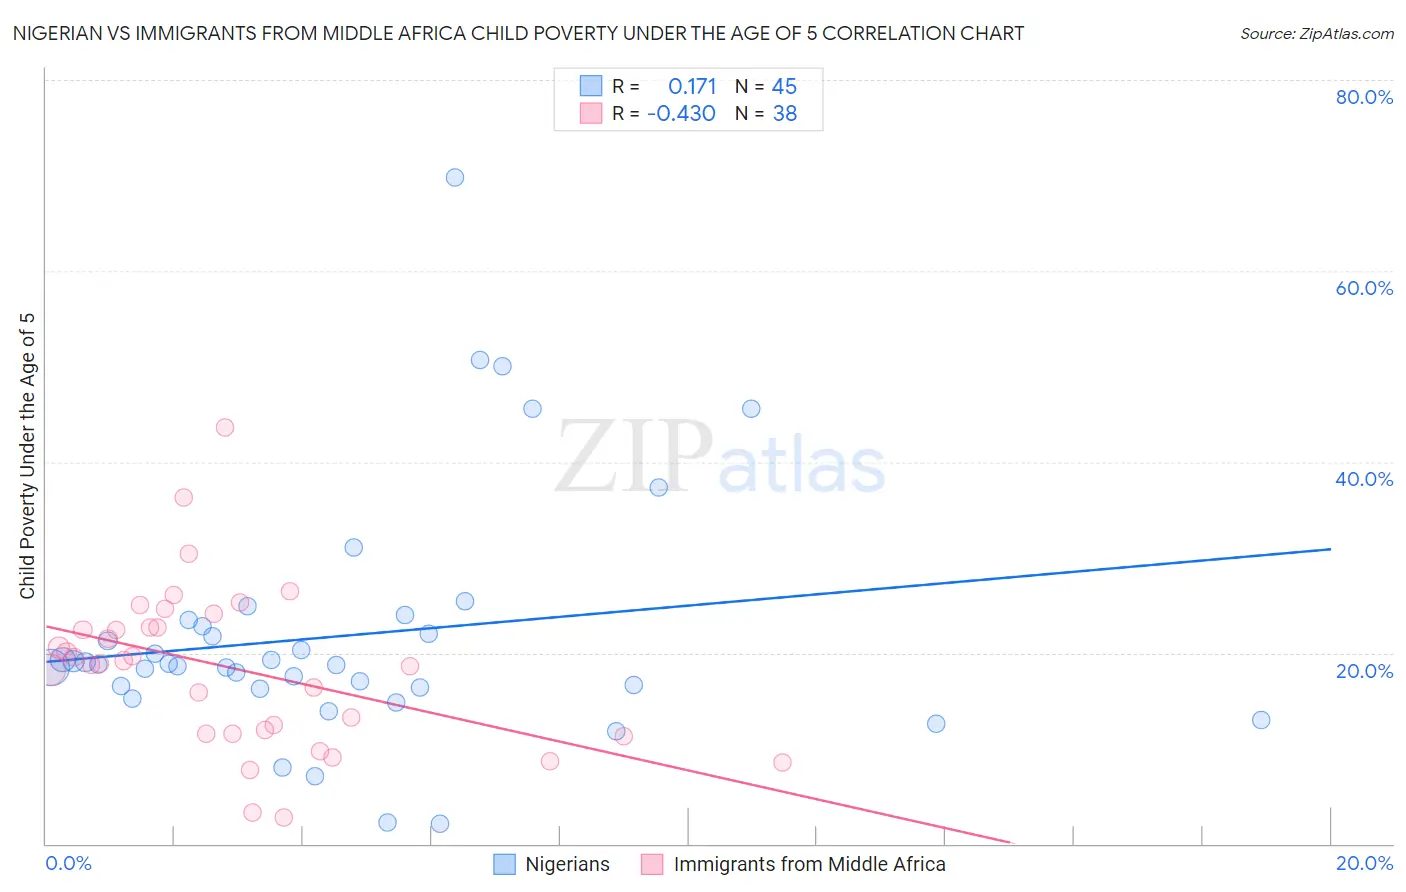 Nigerian vs Immigrants from Middle Africa Child Poverty Under the Age of 5